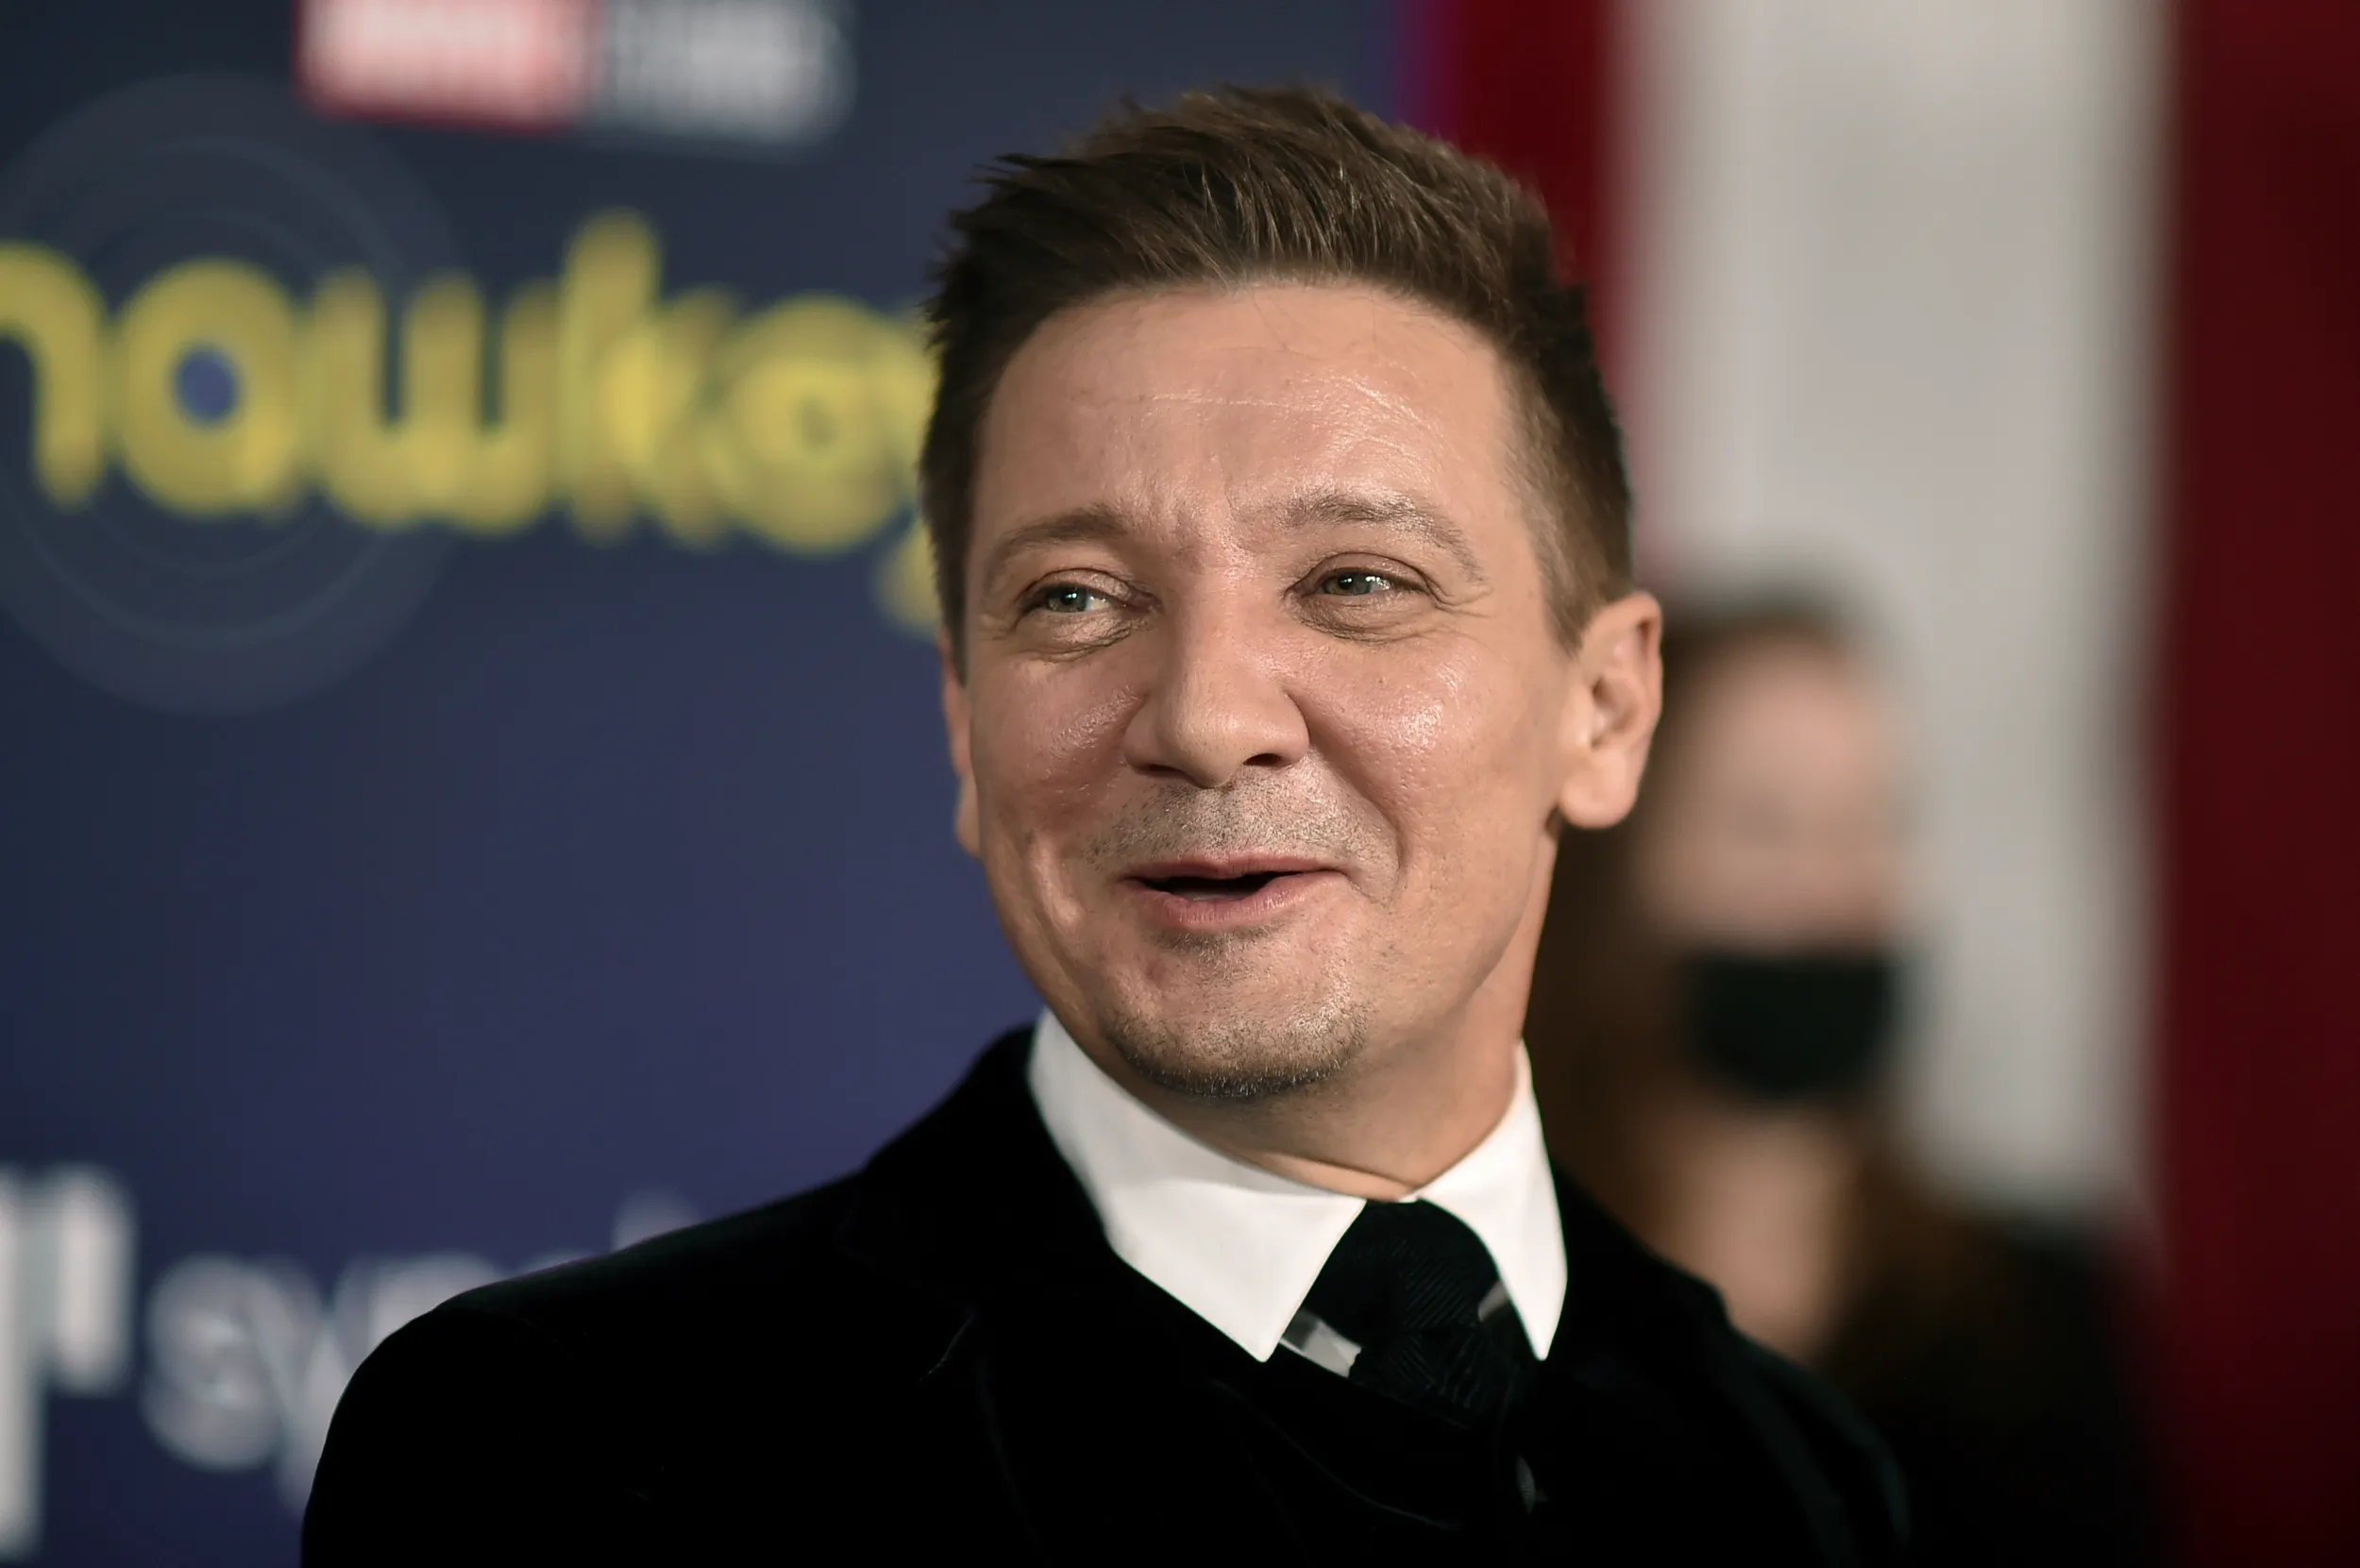 "Jeremy Renner" in Critical Condition After Latest Accident - What You Need To Know